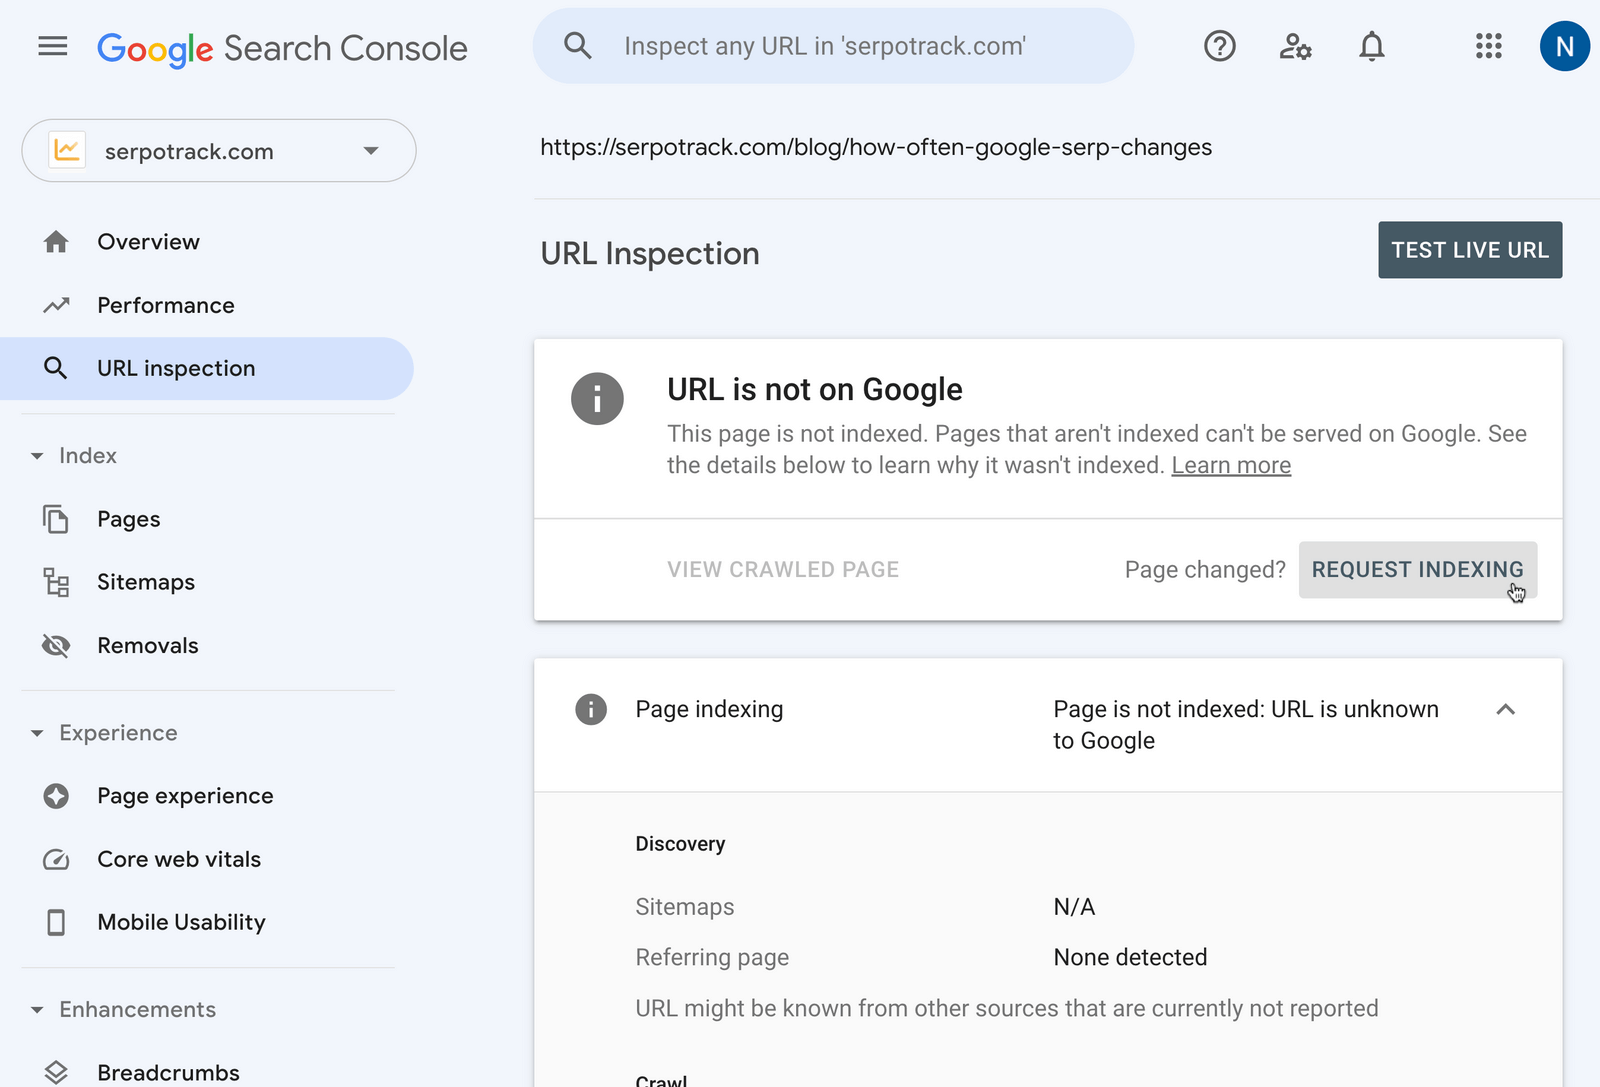 Submitting URL to Google Search Console to have it indexed